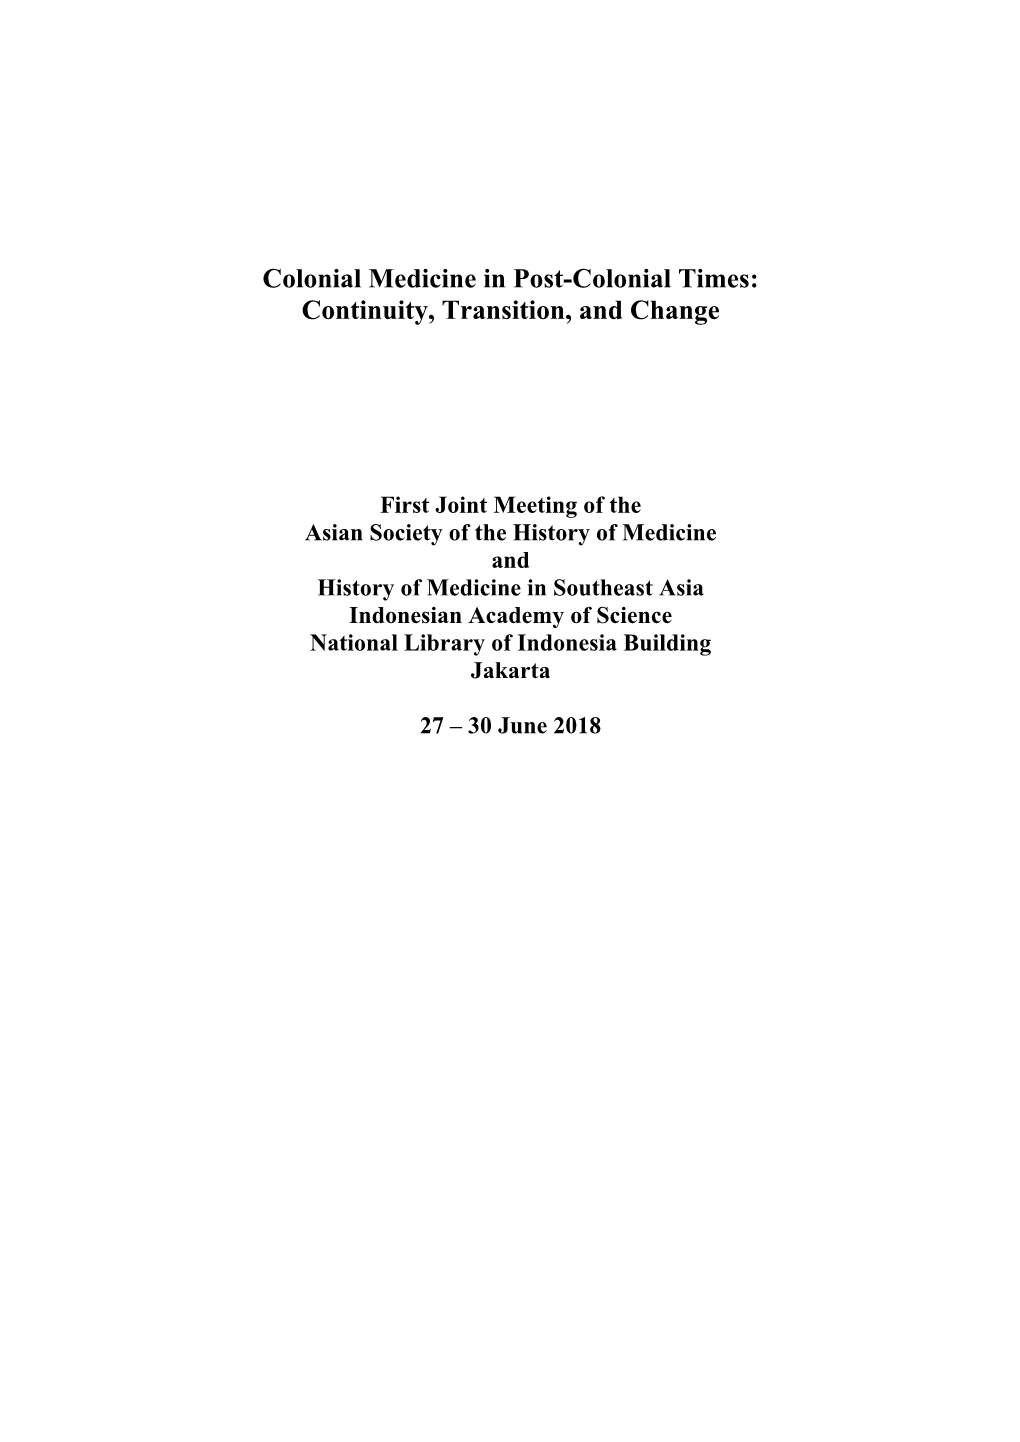 Colonial Medicine in Post-Colonial Times: Continuity, Transition, and Change